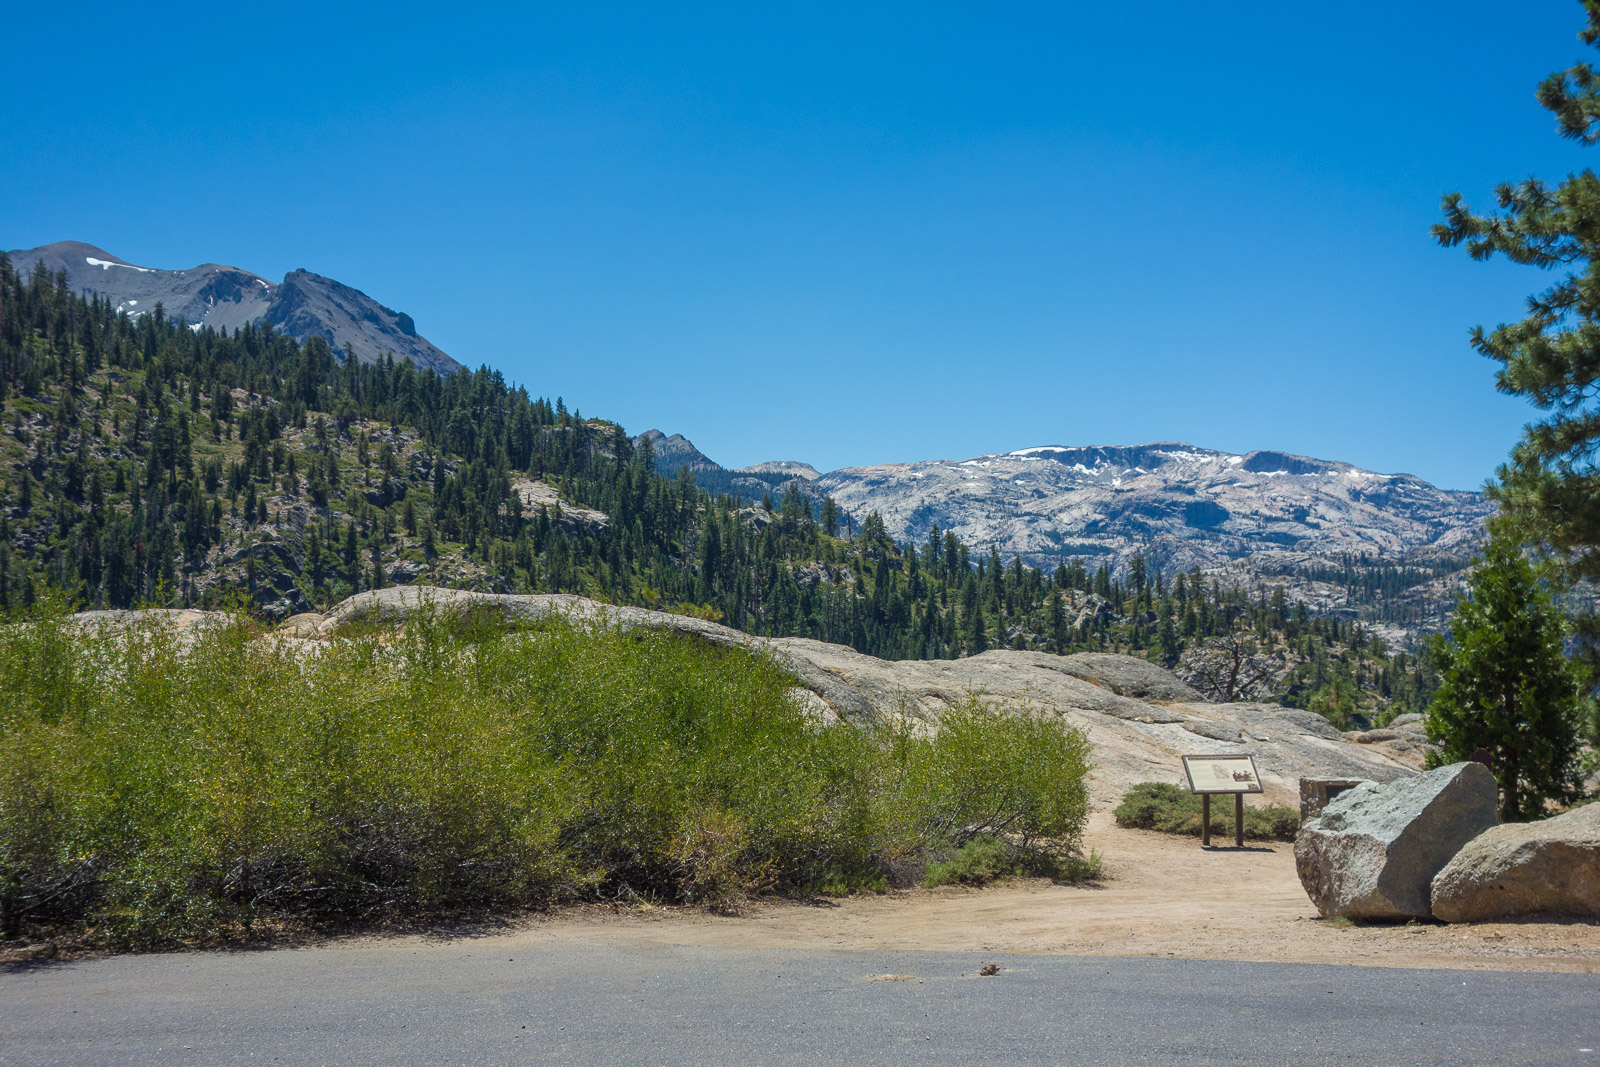 Relief Peak (10808ft) at left, and Granite Dome (10320ft) at center.